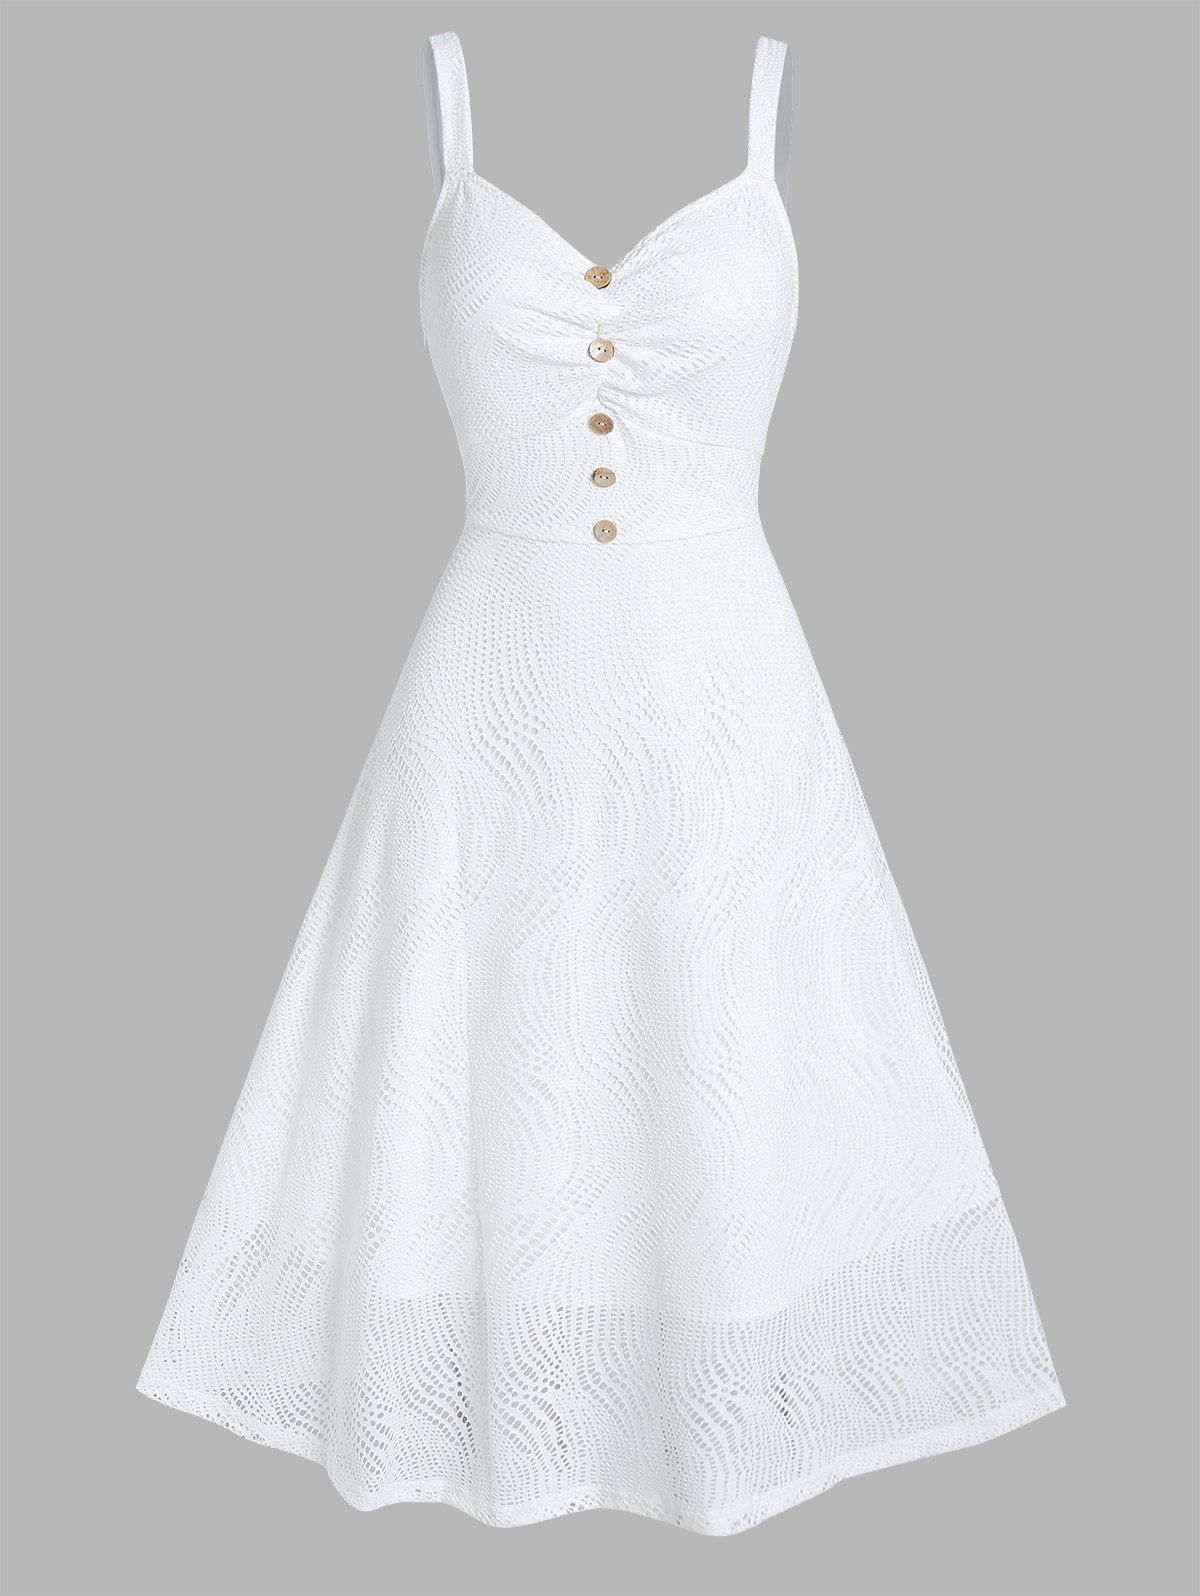 Casual Dress Pure Color Lace Dress Hollow Out Mock Button Sleeveless Empire Waist A Line Midi Summer Dress - WHITE XL